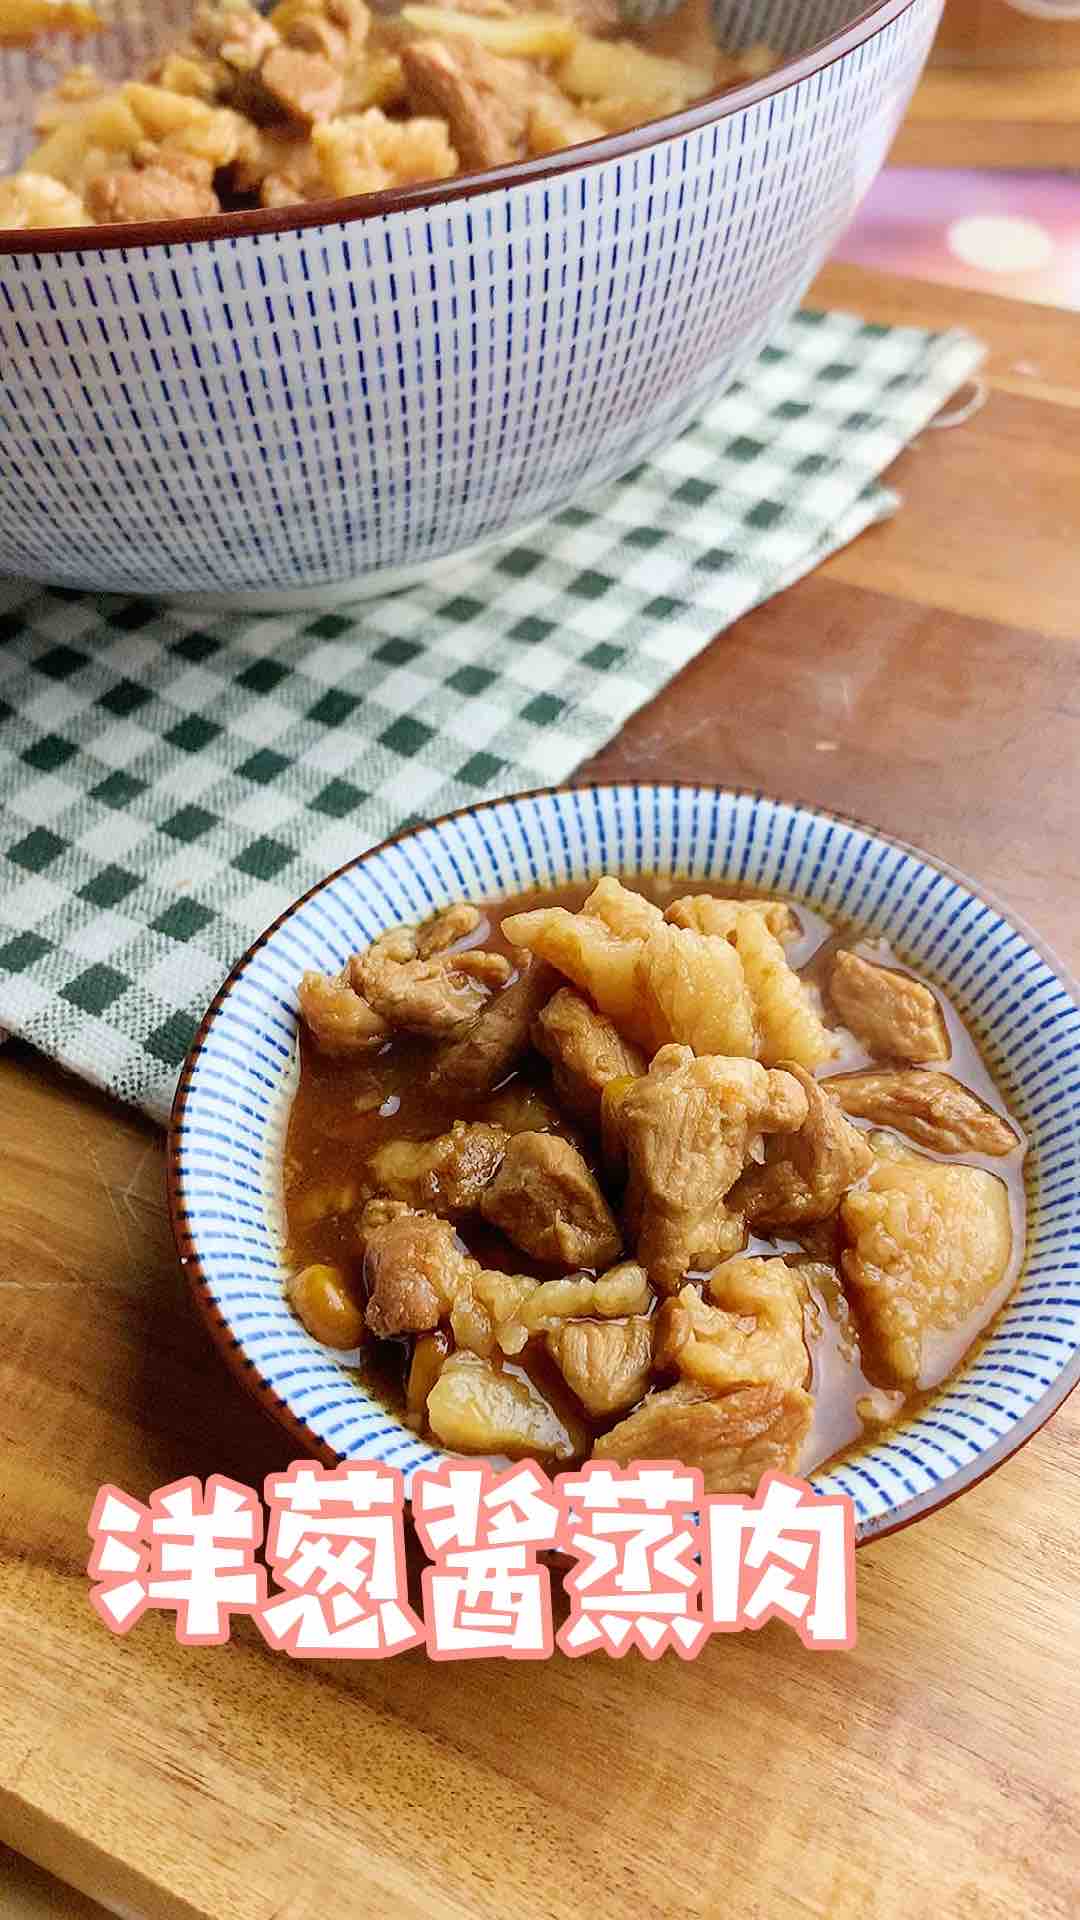 Steamed Pork with Onion Sauce recipe